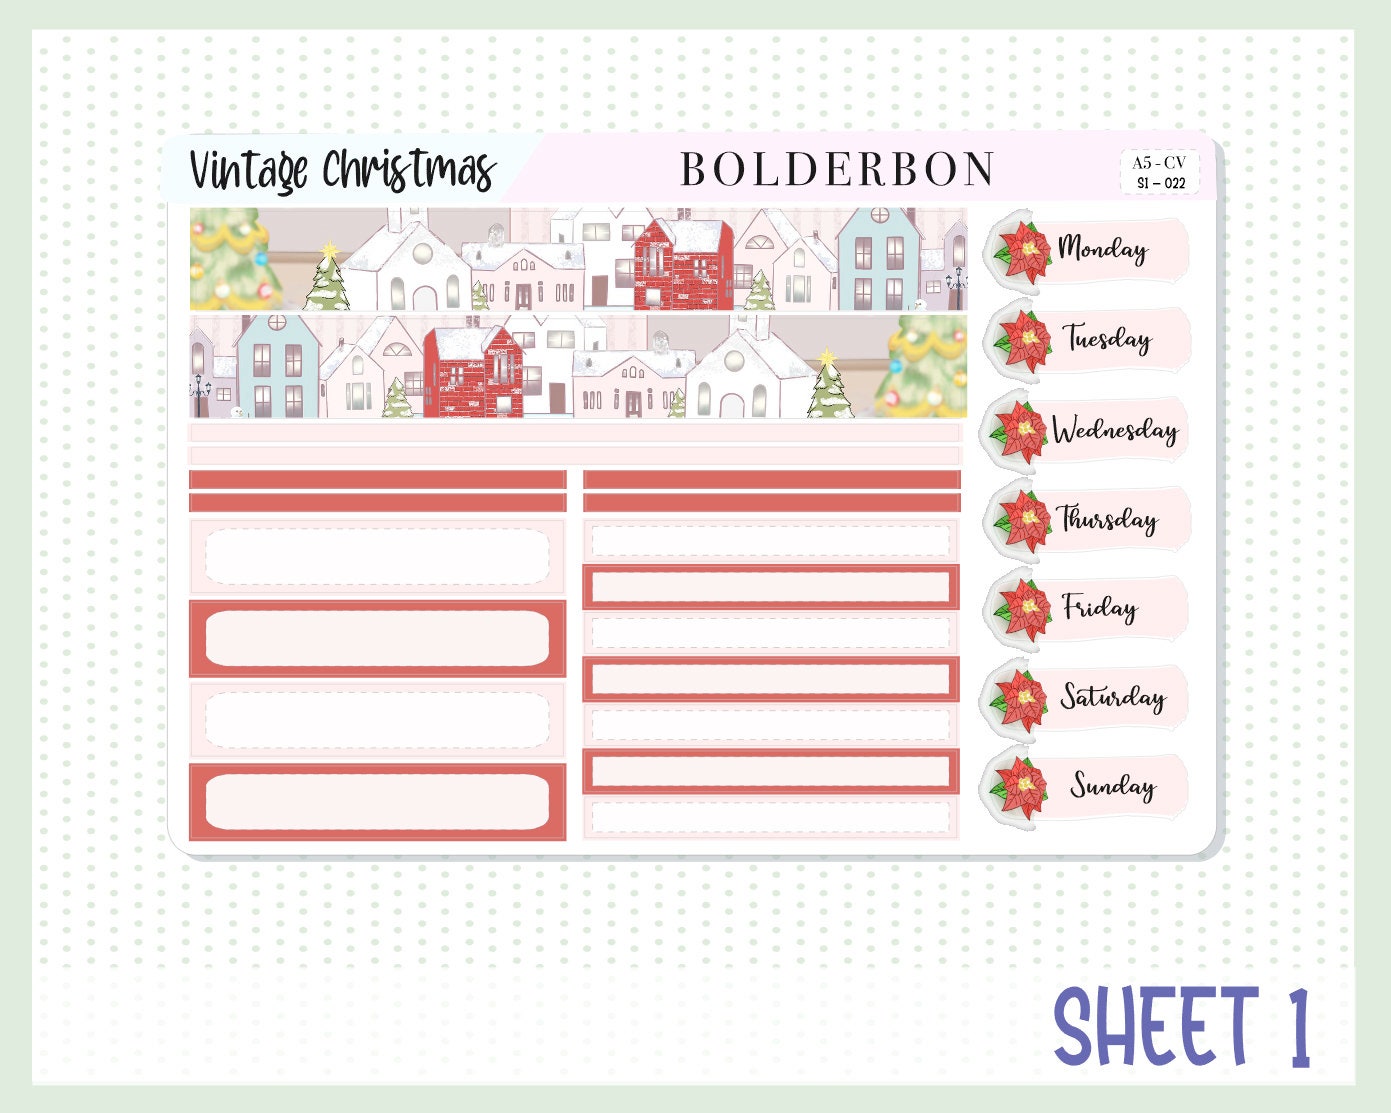 VINTAGE CHRISTMAS || A5 Compact Vertical Planner Sticker Kit